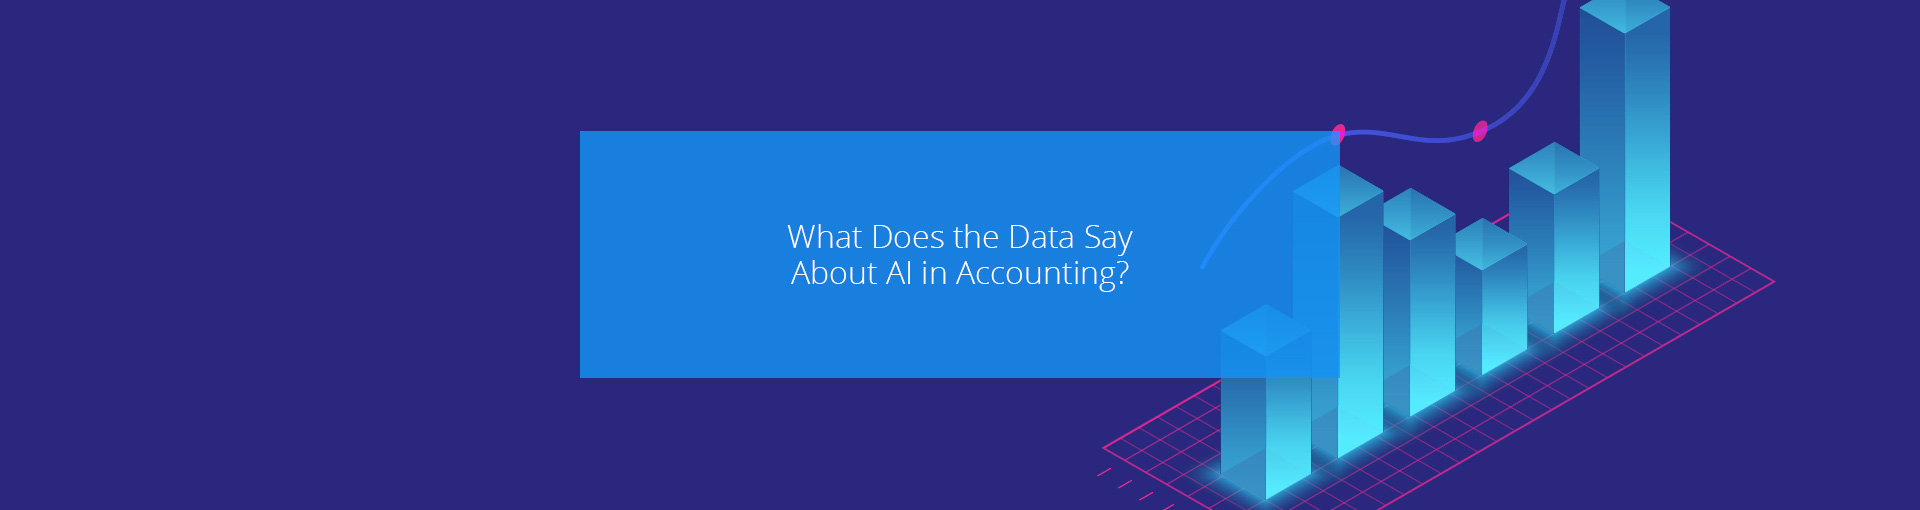 What Does the Data Say About AI in Accounting? Featured Image